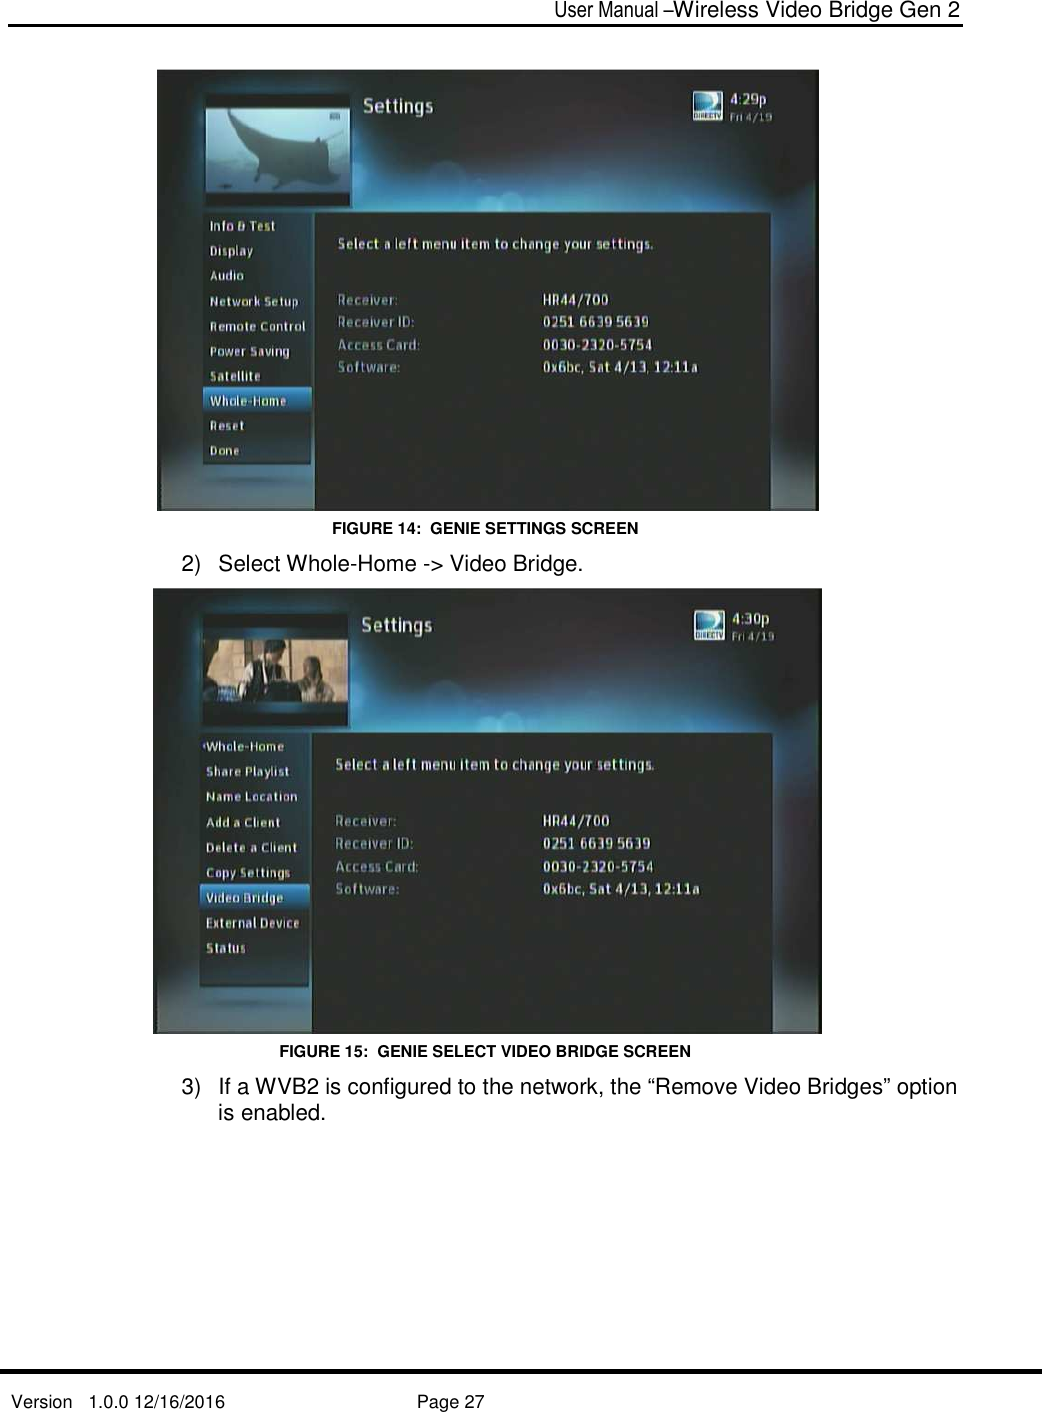  User Manual –Wireless Video Bridge Gen 2  Version   1.0.0 12/16/2016     Page 27    FIGURE 14:  GENIE SETTINGS SCREEN 2)  Select Whole-Home -&gt; Video Bridge.  FIGURE 15:  GENIE SELECT VIDEO BRIDGE SCREEN 3)  If a WVB2 is configured to the network, the “Remove Video Bridges” option is enabled. 